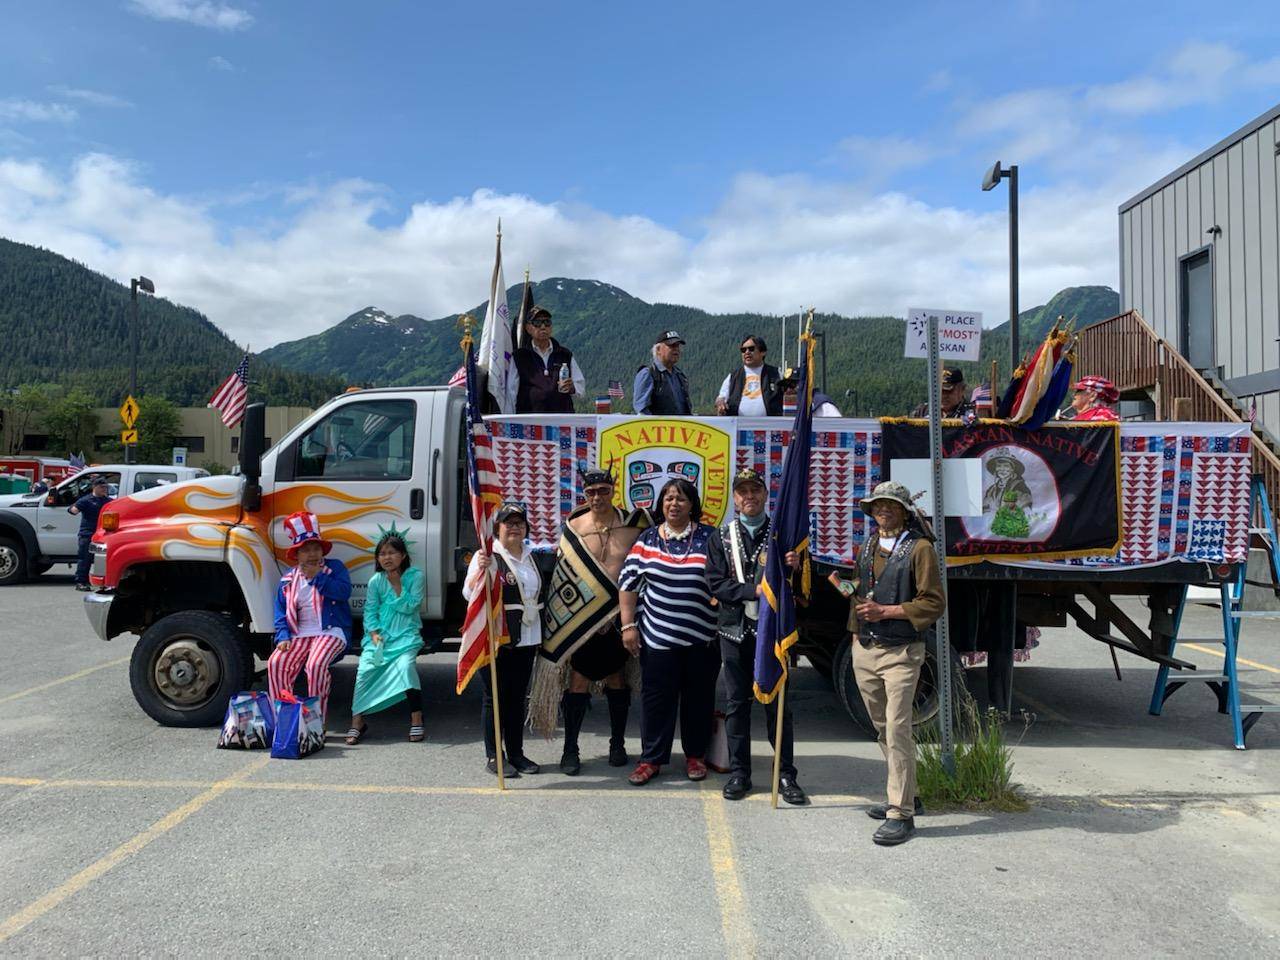 Marshals in the Juneau Fourth of July parade get ready for festivities on July 4, 2021. (Dana Zigmund / Juneau Empire)